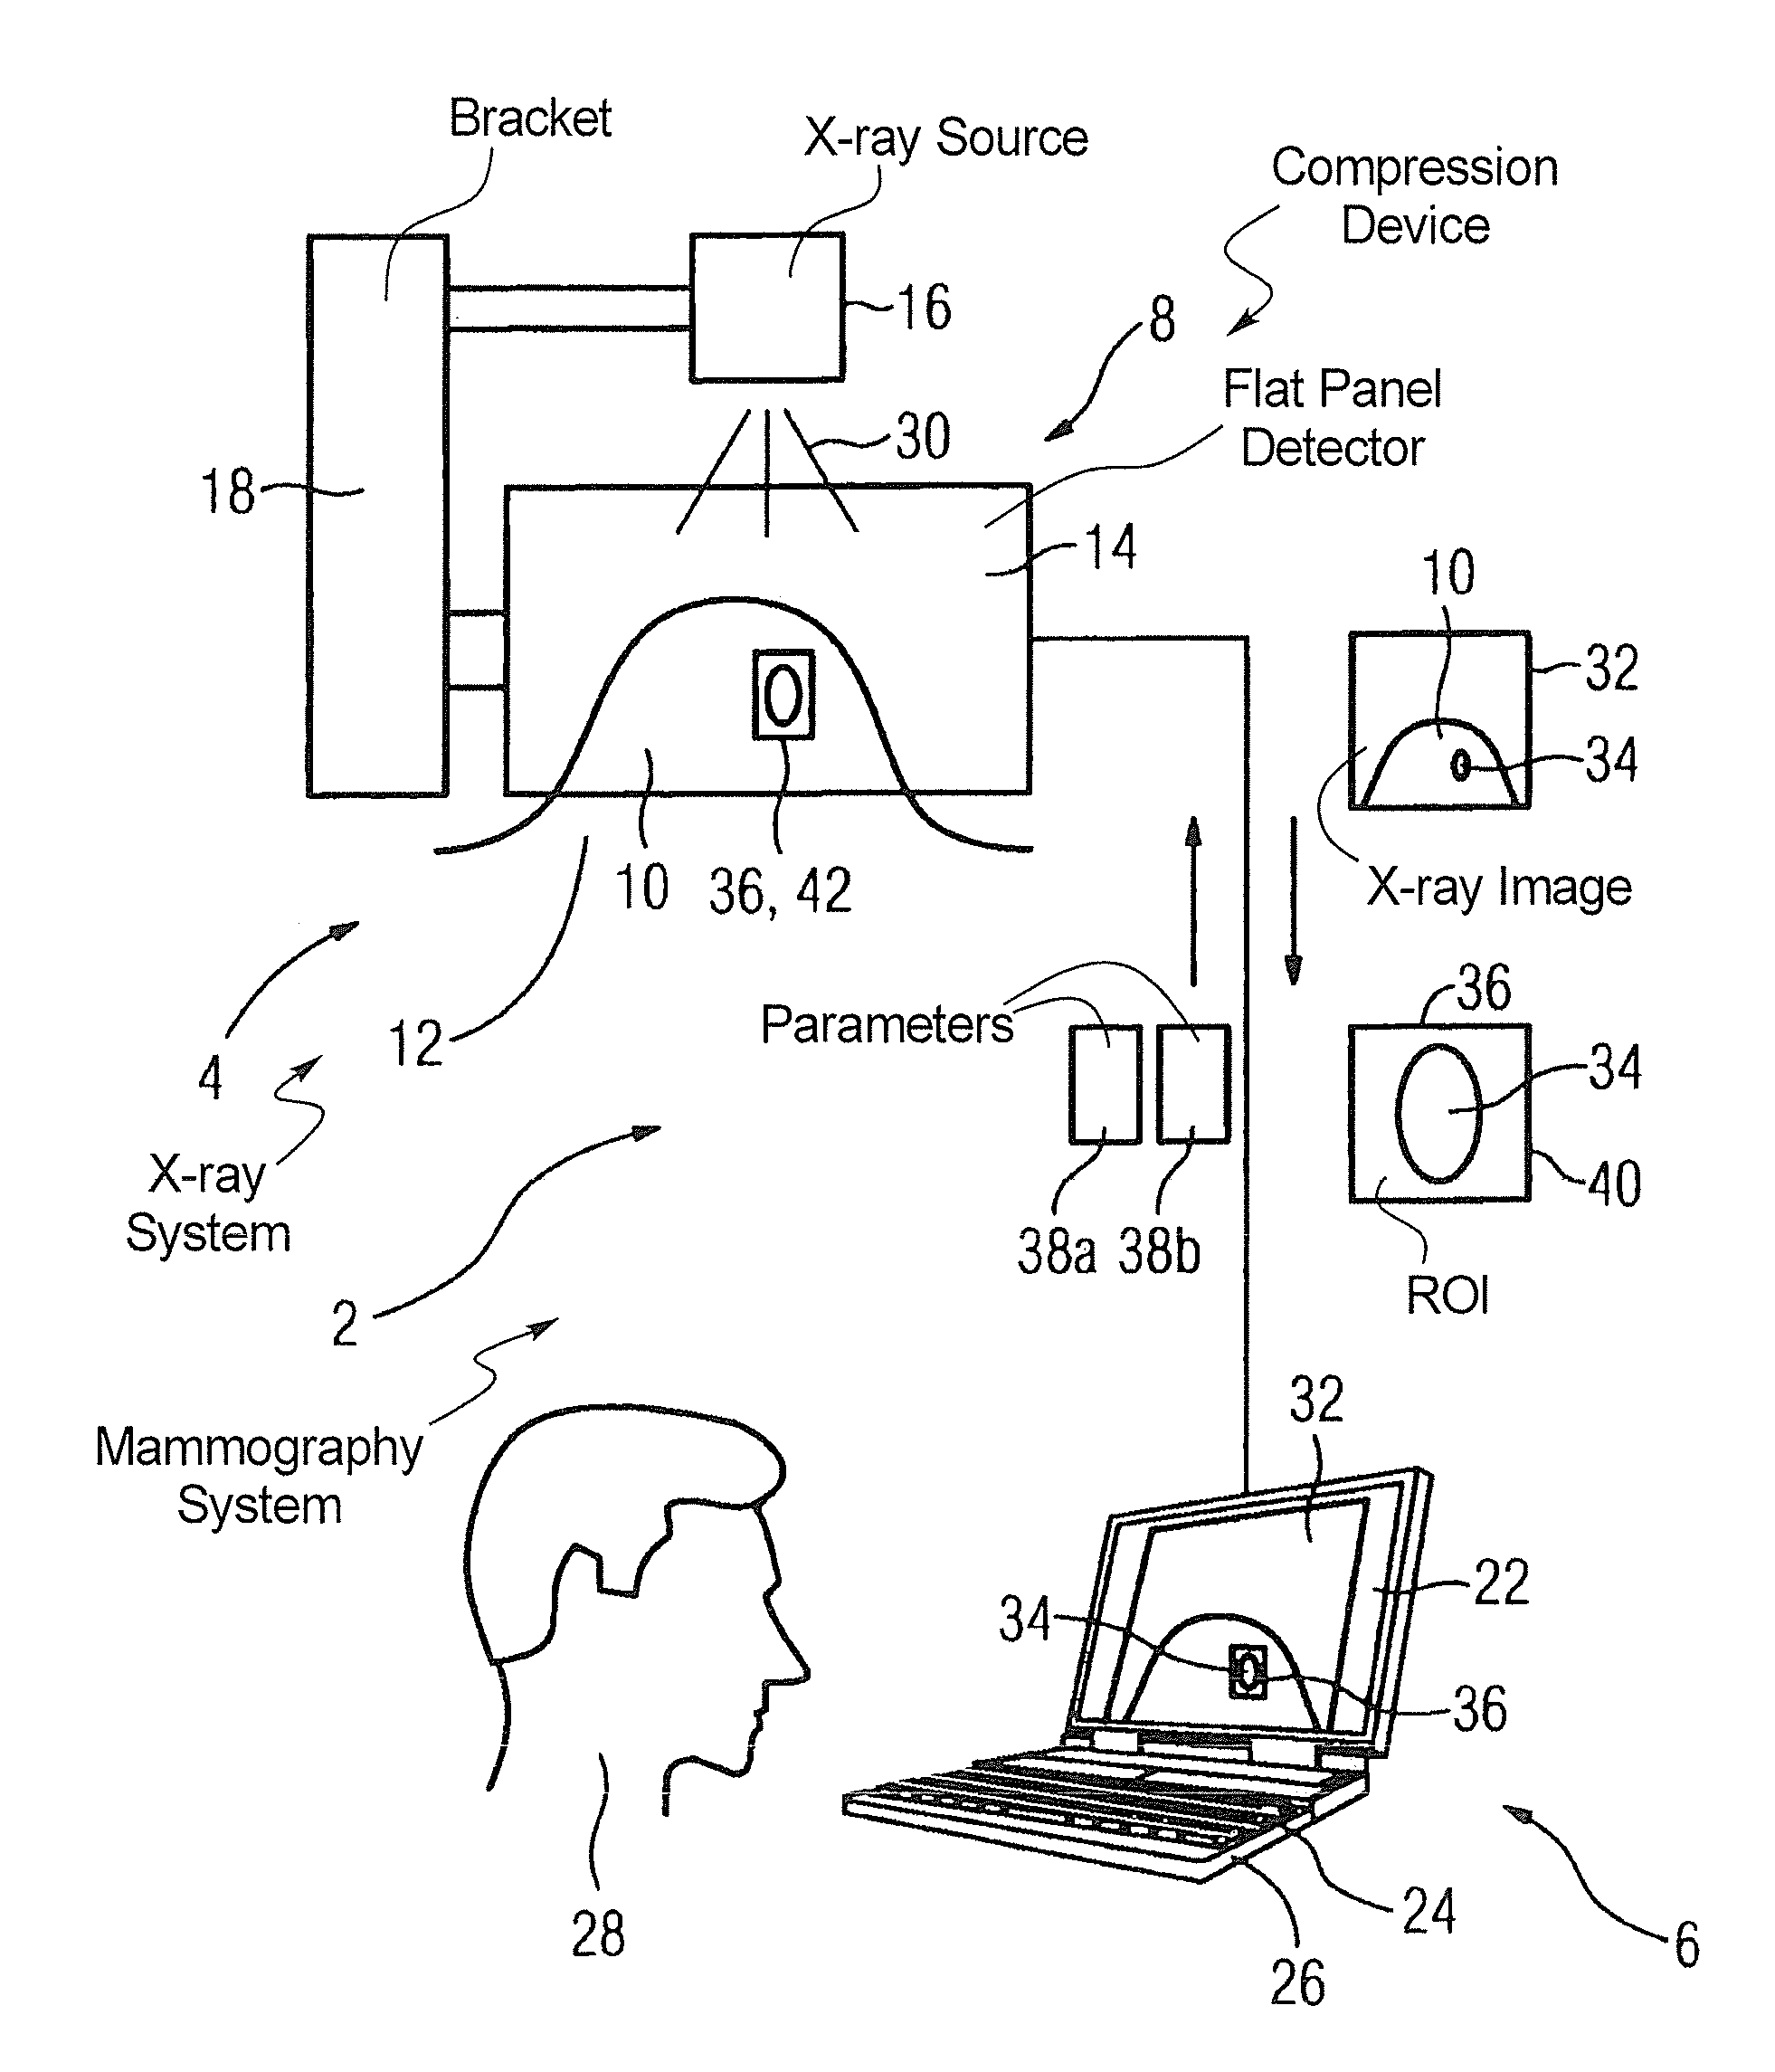 Method for producing an X-ray image during a mammography